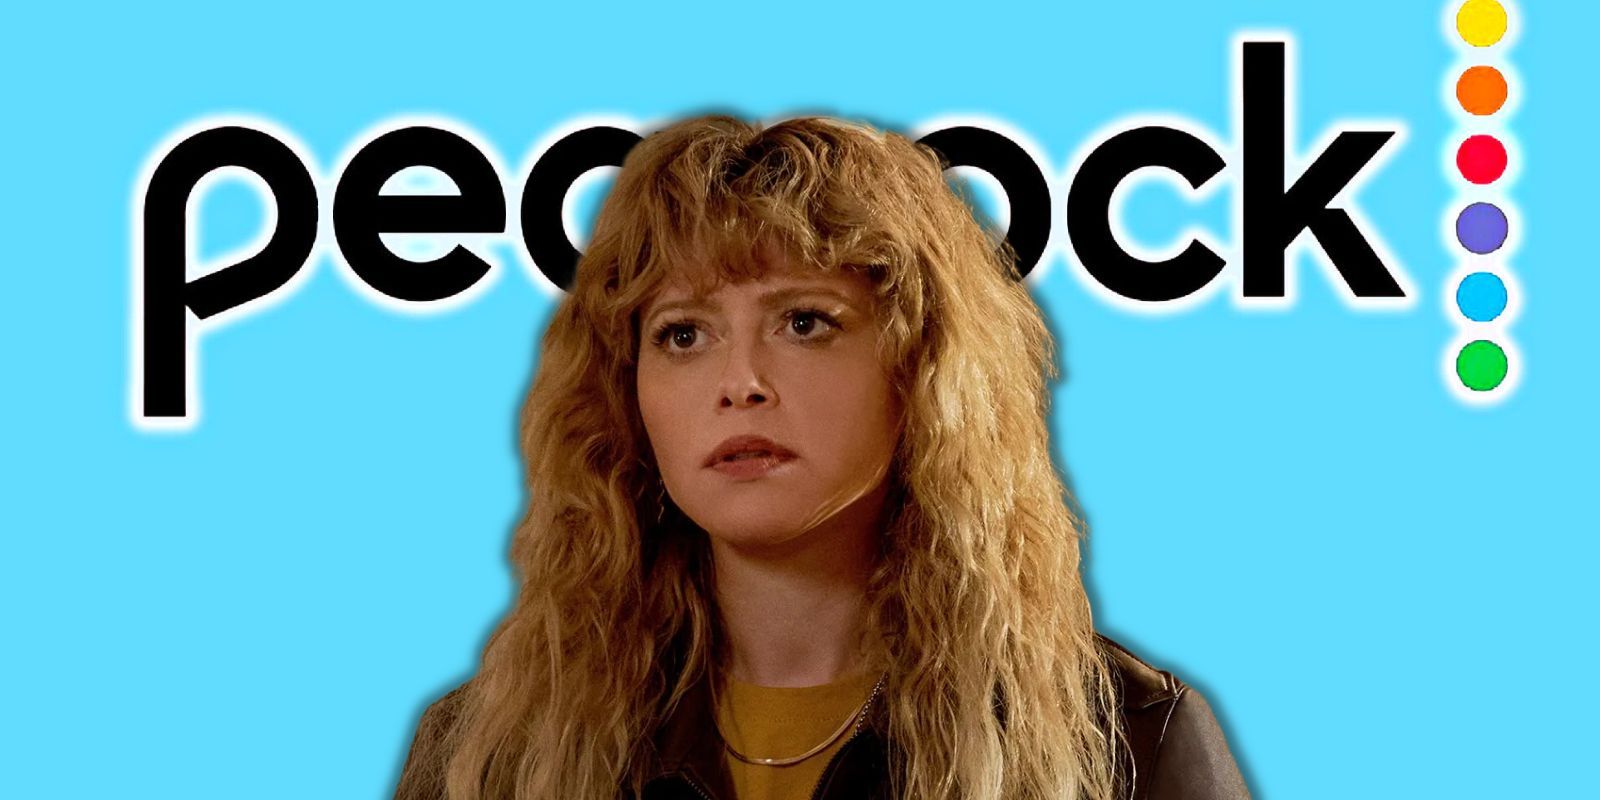 Natahsa Lyonne looking confused over the Peacock logo